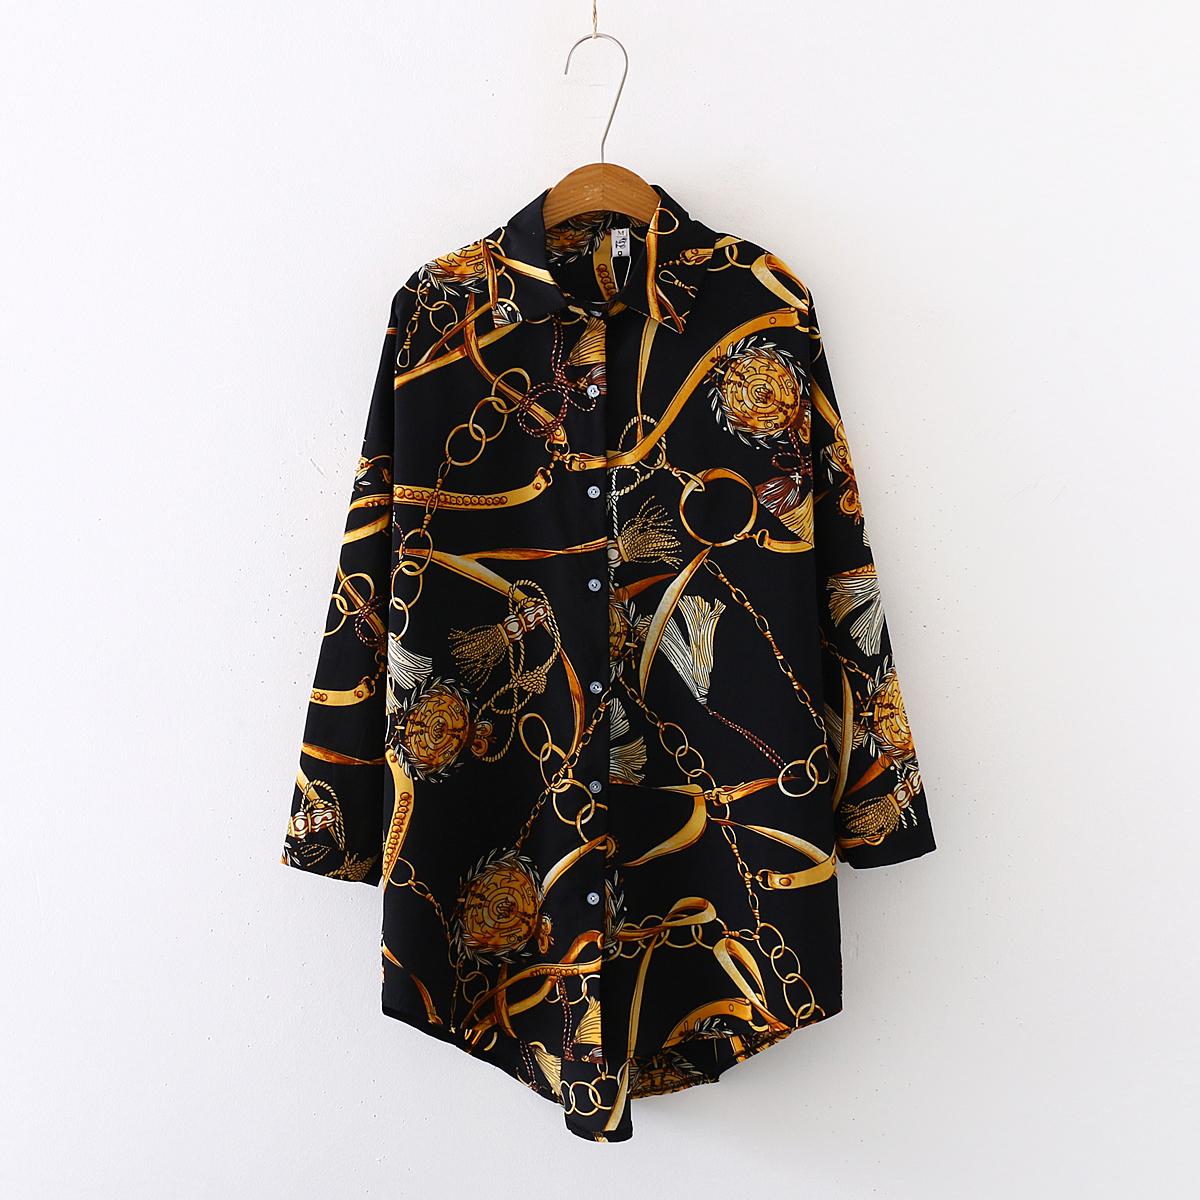 Plus size Fashion casual oversized Women Blouses Spring chiffon Blouse three quarter sleeve Loose Tops Shirts Blusas Mujer